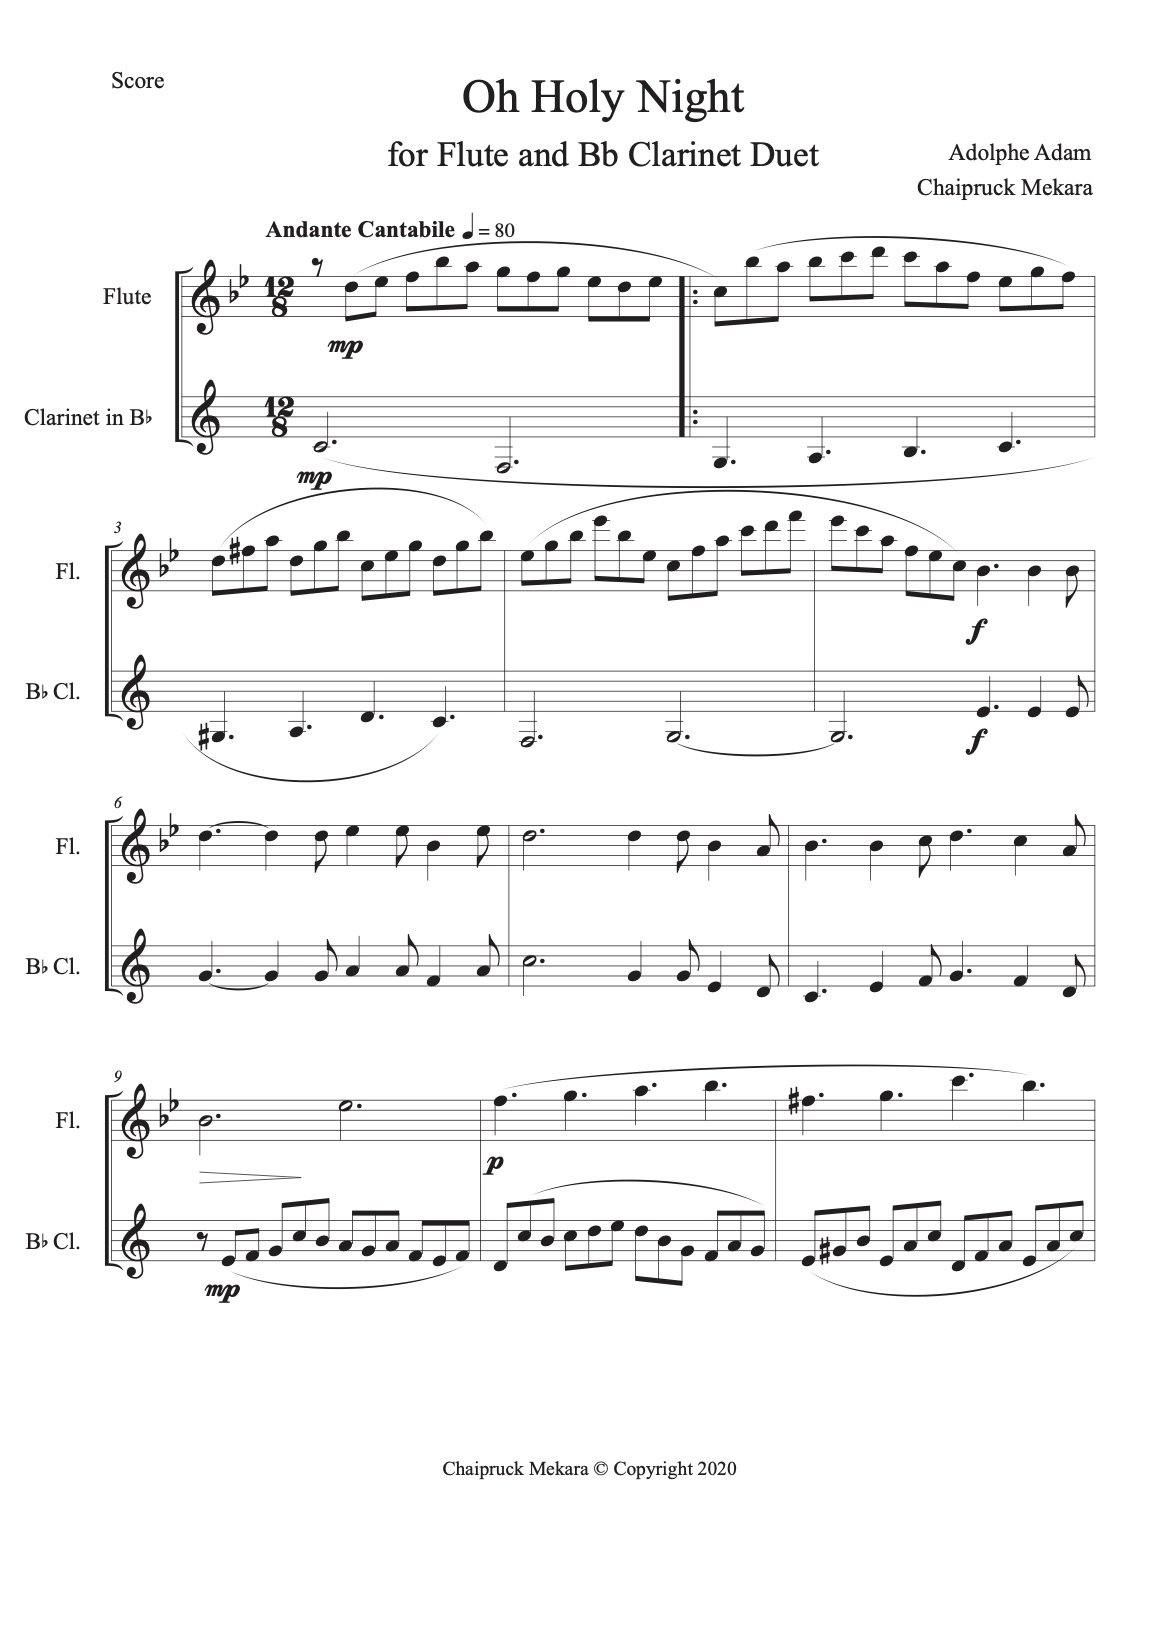 Oh Holy Night for Flute and Bb Clarinet Duet (score+part) - ChaipruckMekara